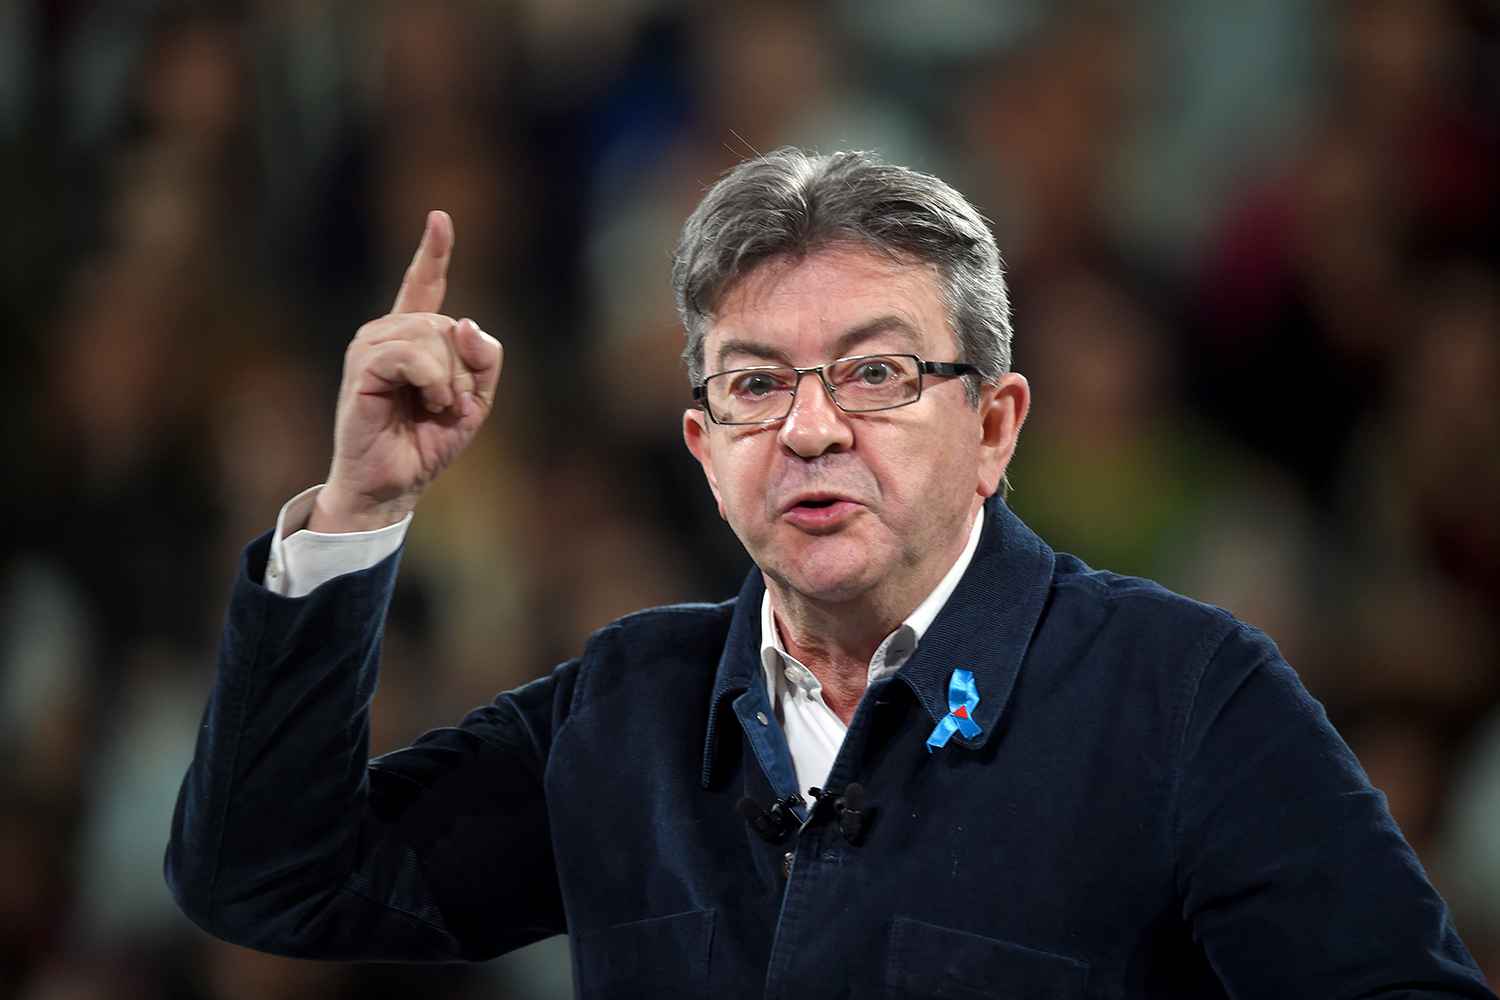 2048x1536-fit_jean-luc-melenchon-meeting-pres-chateauroux-2-avril-2017